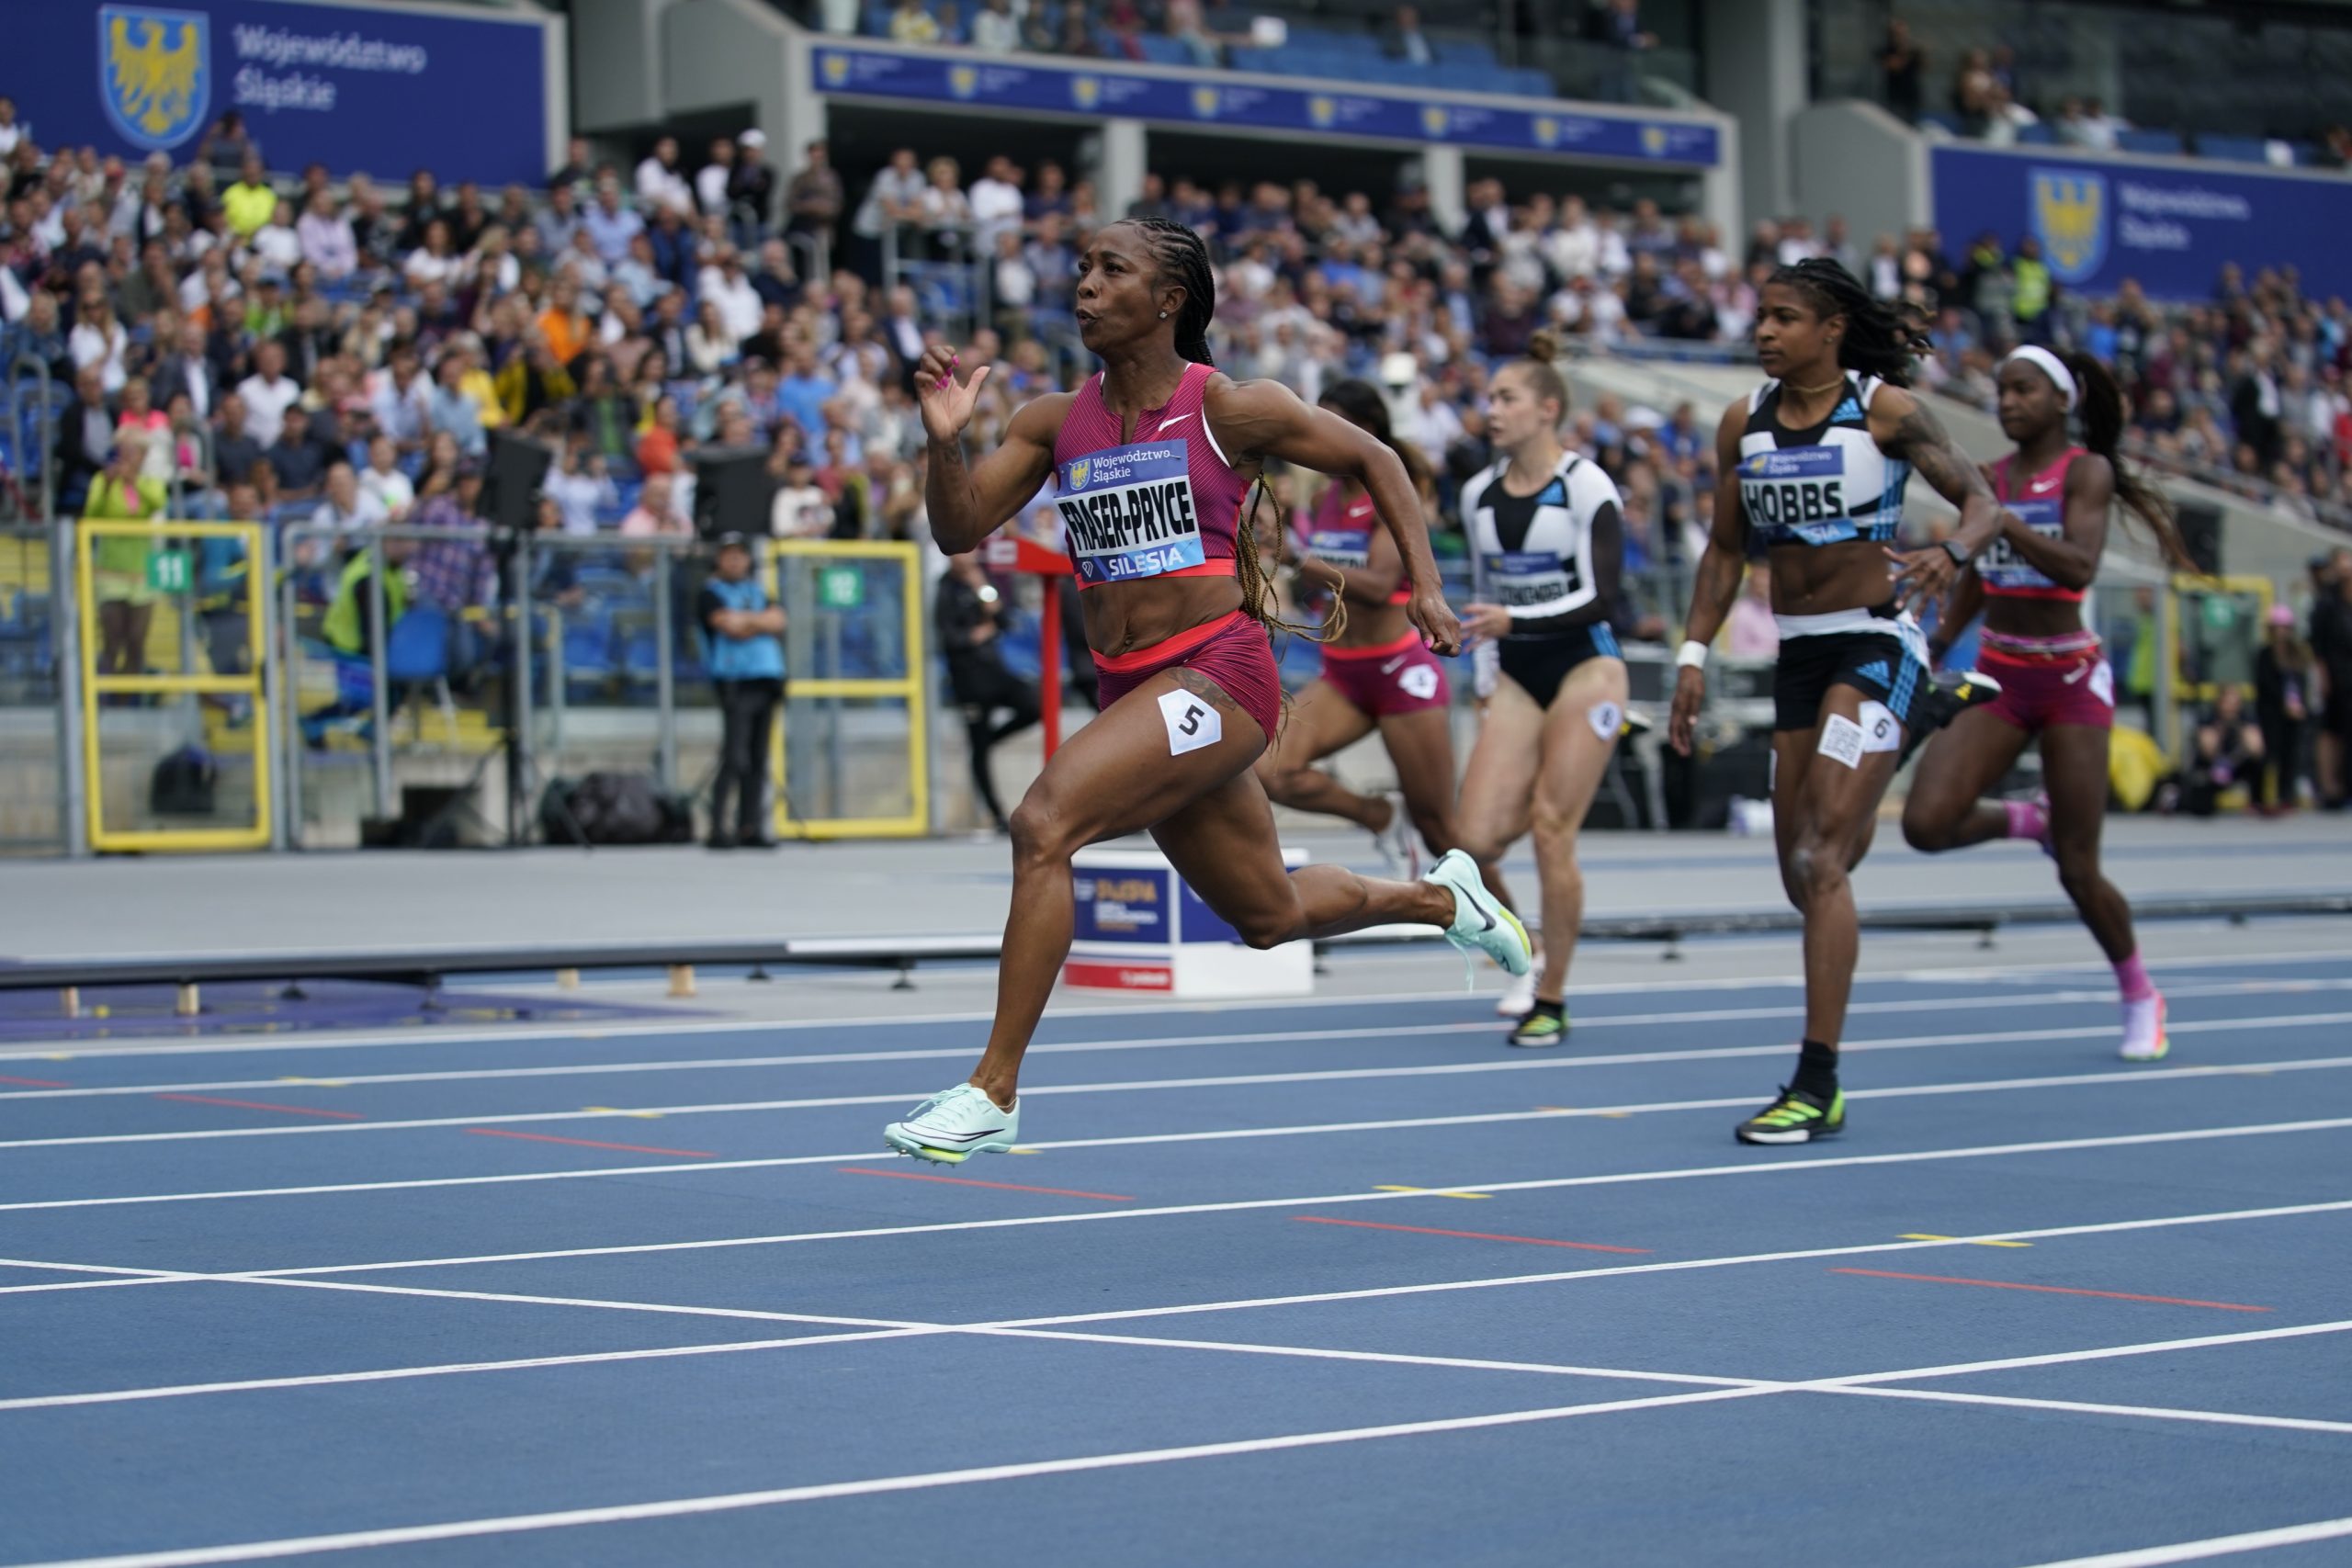 That's the fastest time this year in the women's 100m from Shelly-Ann Fraser-Pryce at the Silesia Diamond League.